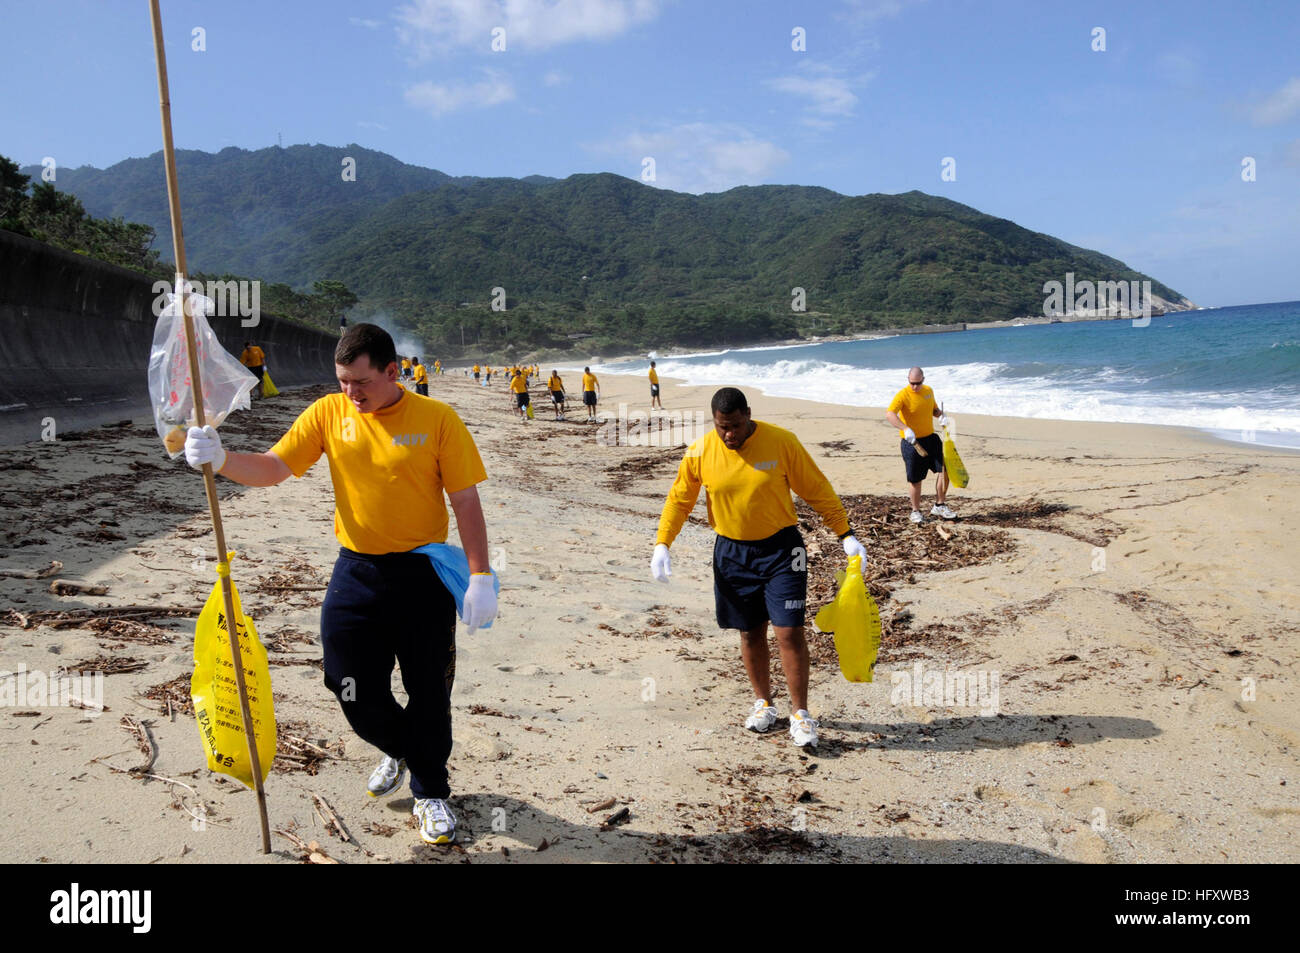 091020-N-8335D-101 YAKUSHIMA, Japan (Oct. 20, 2009) Sailors assigned to the mine countermeasures ship USS Defender (MCM 2) clean Nagata Maehama beach on the Japanese island of Yakushima during a community service project. The beach is the most densely used spawning ground of the endangered Loggerhead turtle in the northern Pacific Ocean. Defender is the first U.S. Navy ship to make a port call to Yakushima, located about 225 miles south of the Japanese mainland.  (U.S. Navy photo by Mass Communication Specialist 1st Class Richard Doolin/Released) US Navy 091020-N-8335D-101 Sailors assigned to  Stock Photo